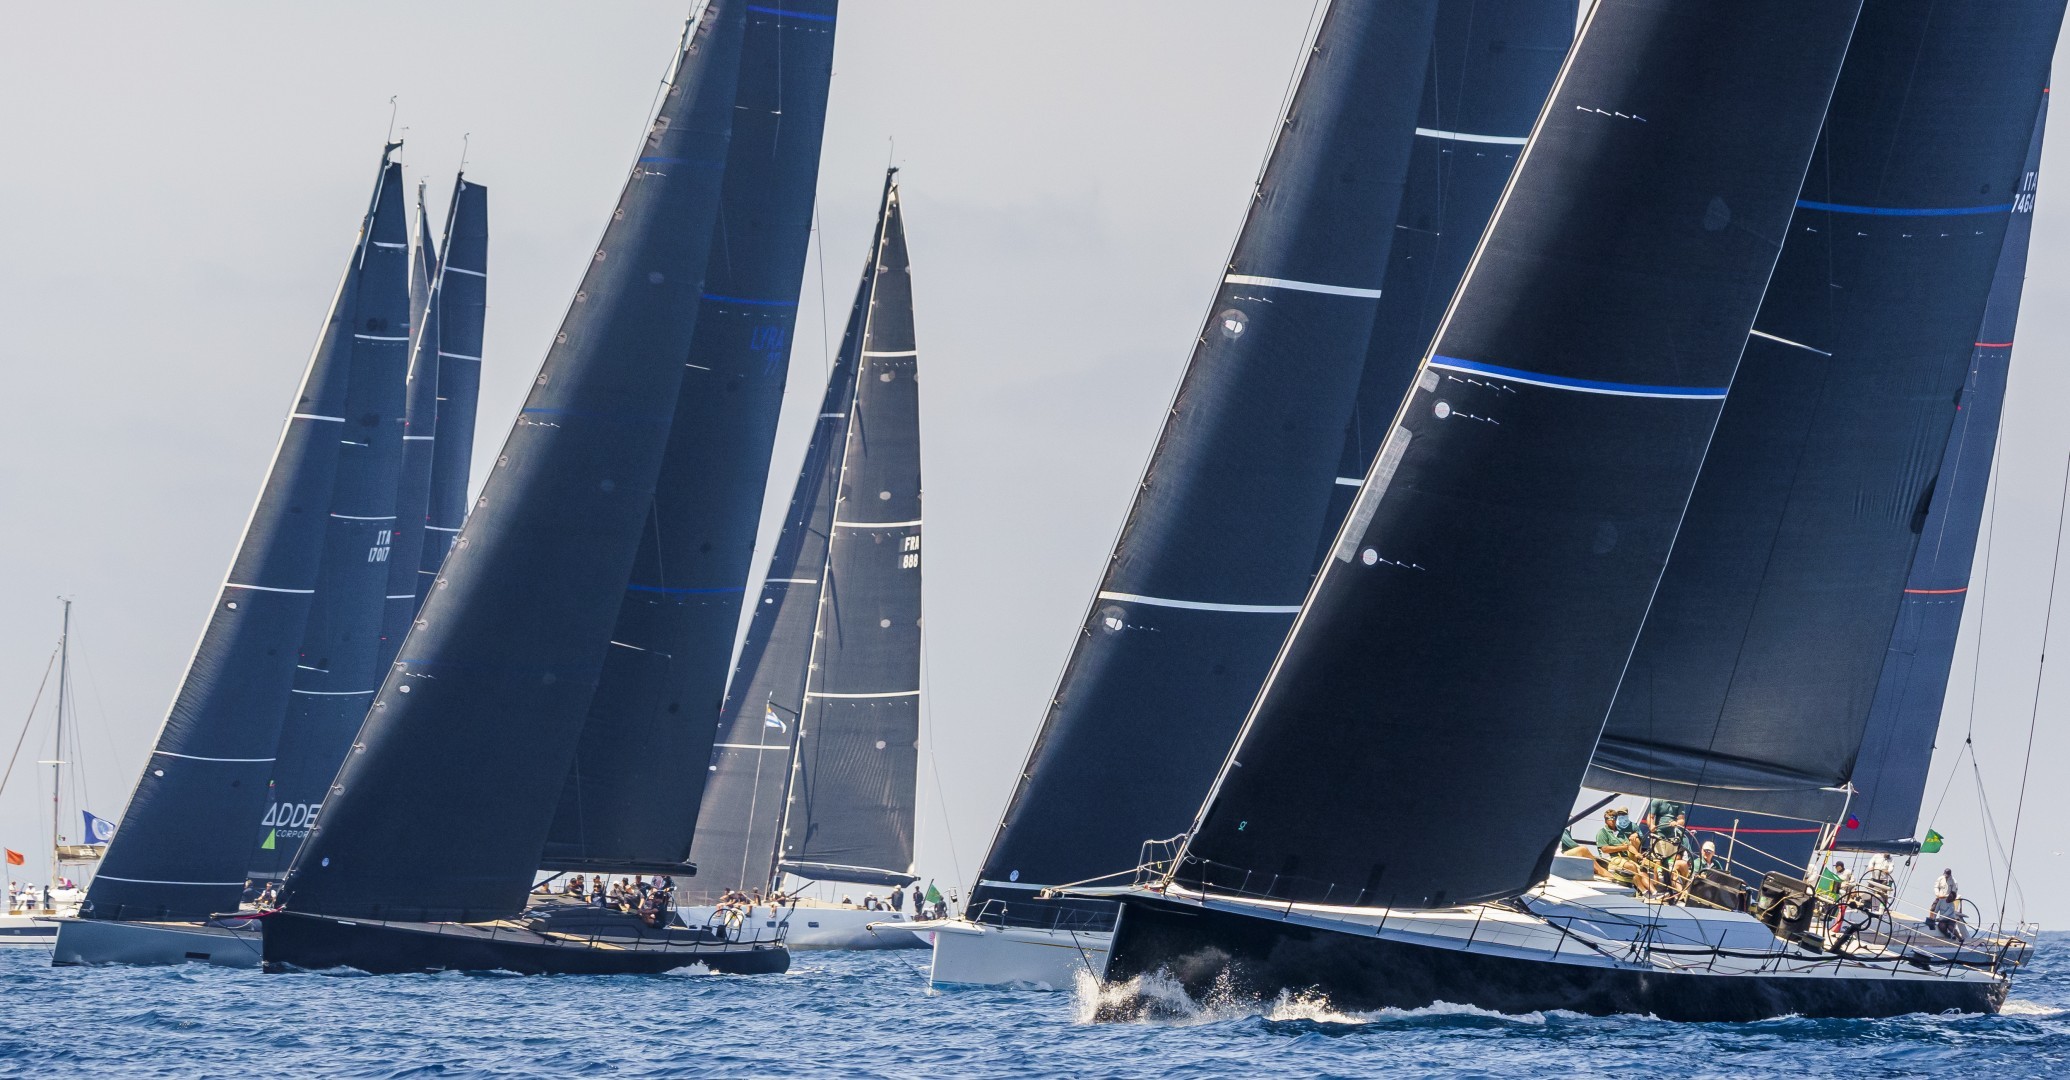 The maxis are all starting together at this IMA Maxi European Championship